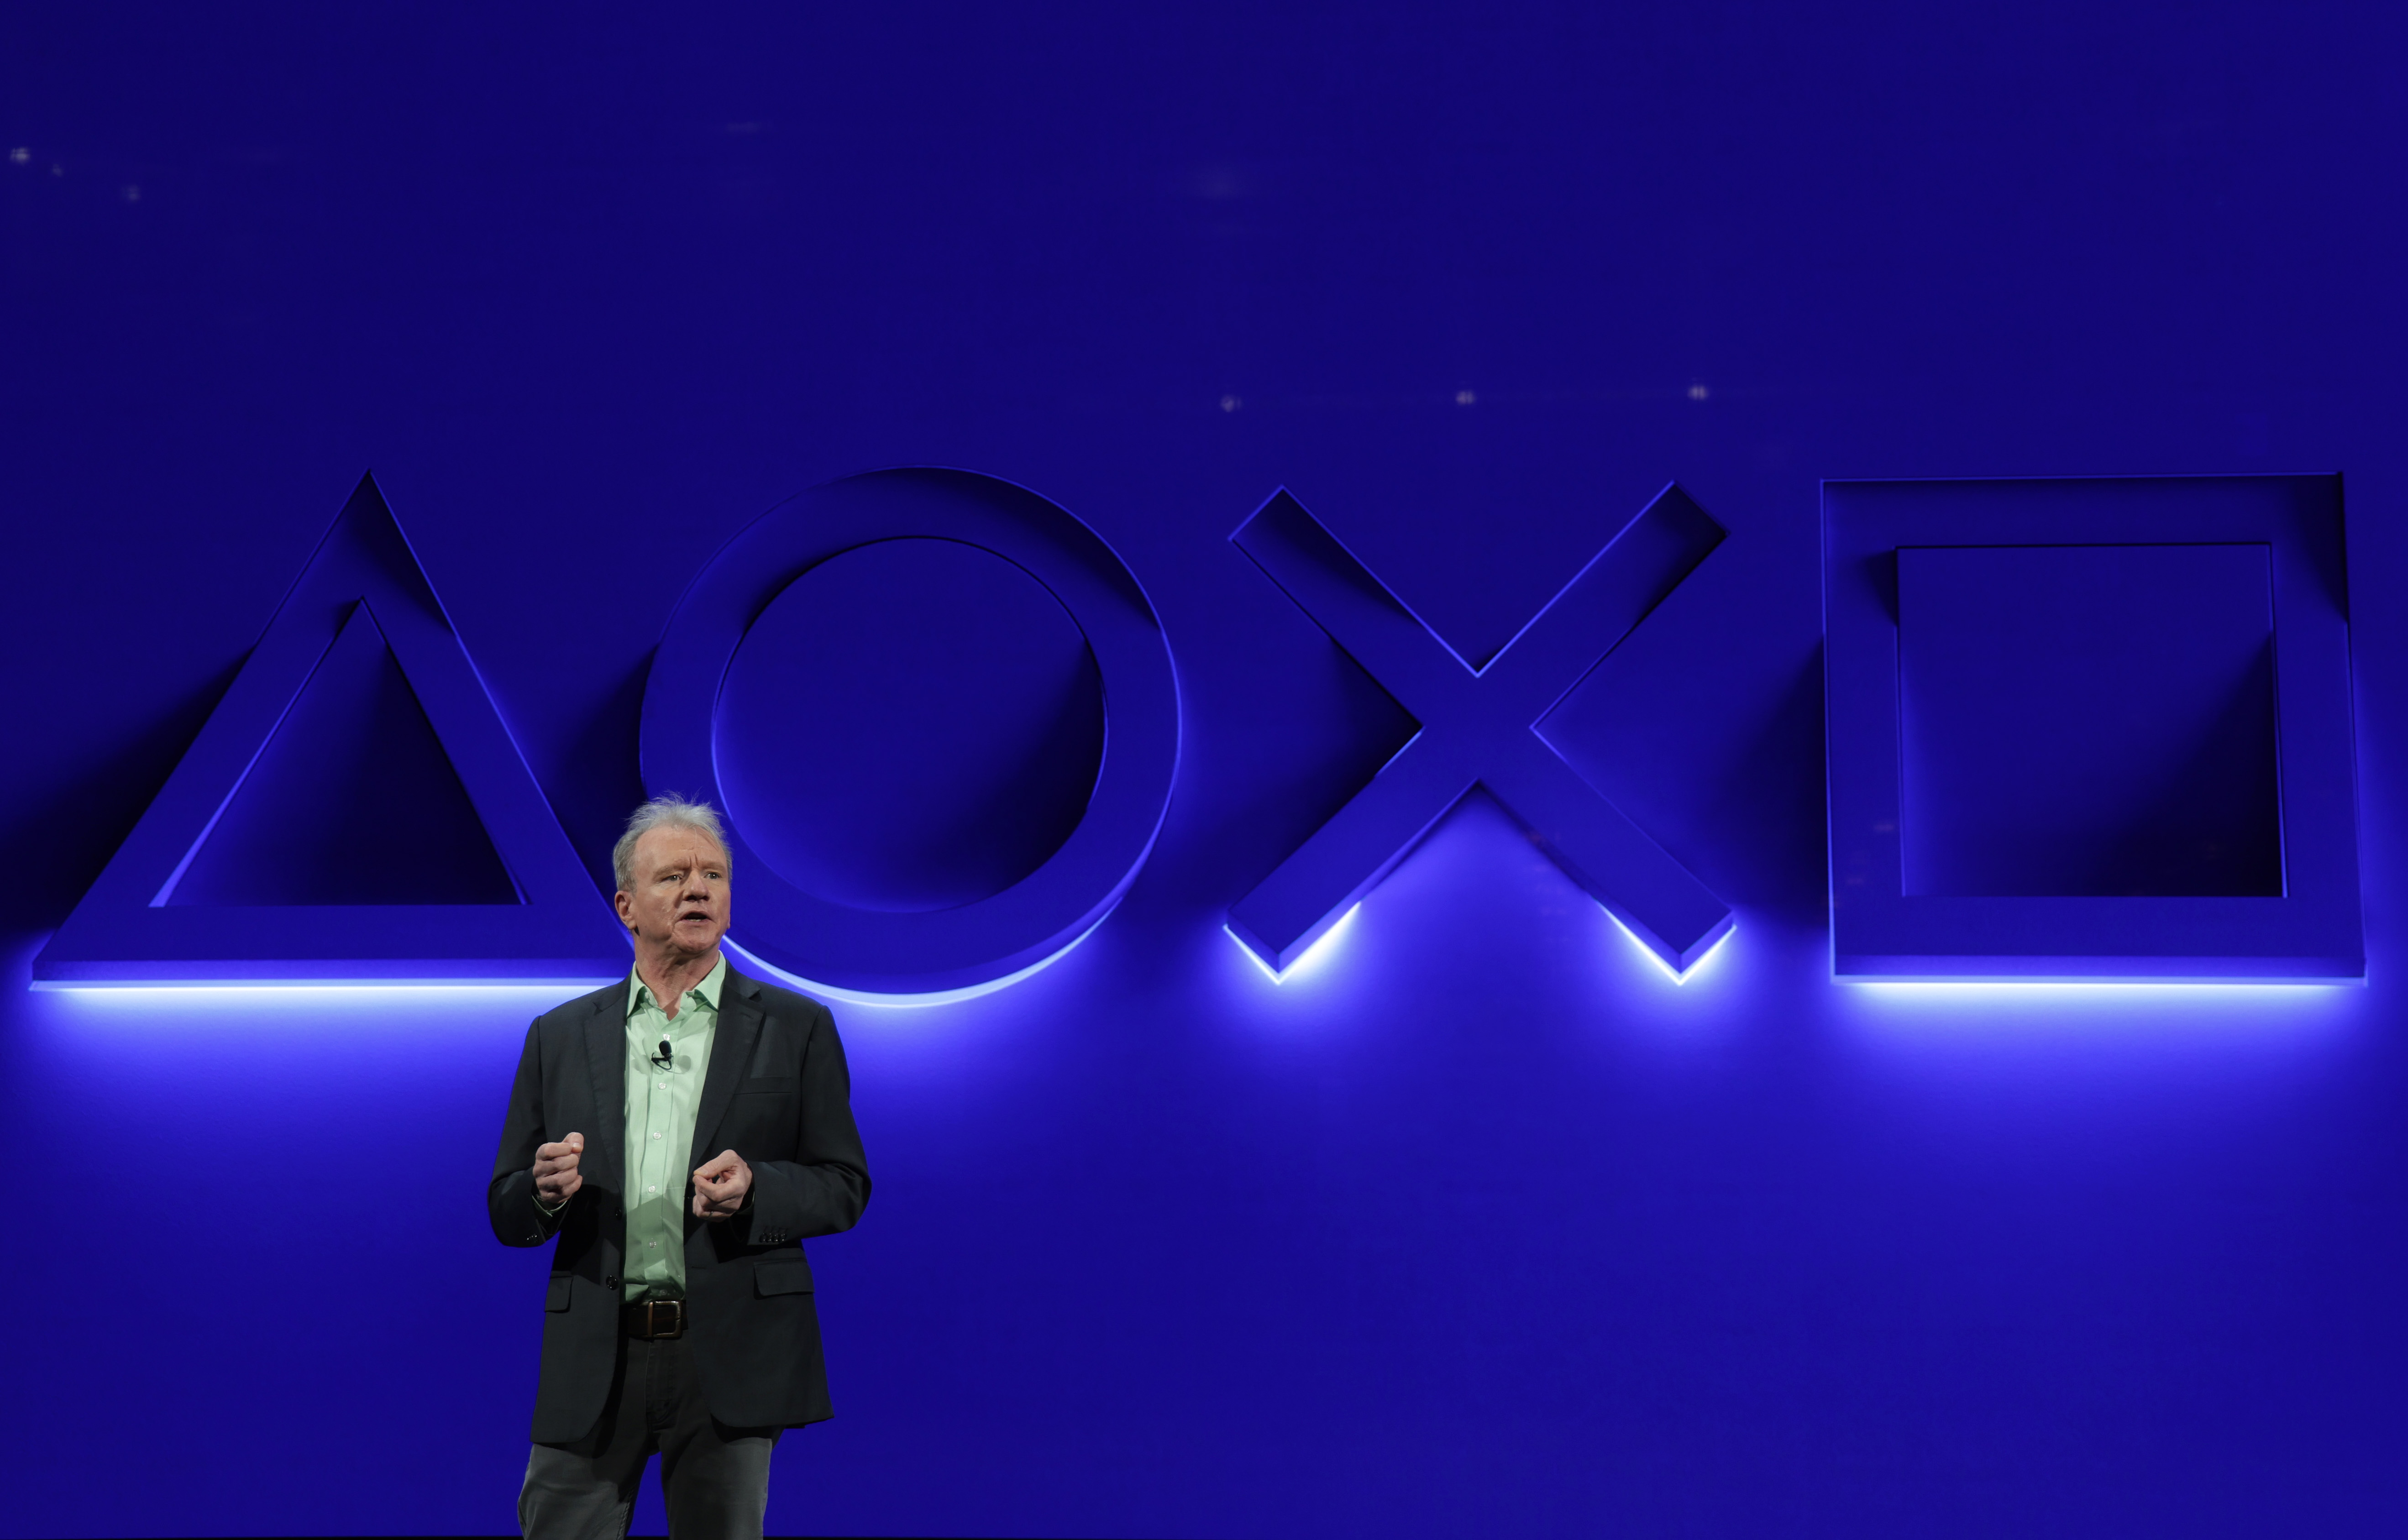 President and CEO of Sony’s PlayStation division Jim Ryan speaks during a Sony media event for CES 2022 at the Mandalay Bay Convention Center on January 4, 2022 in Las Vegas, Nevada